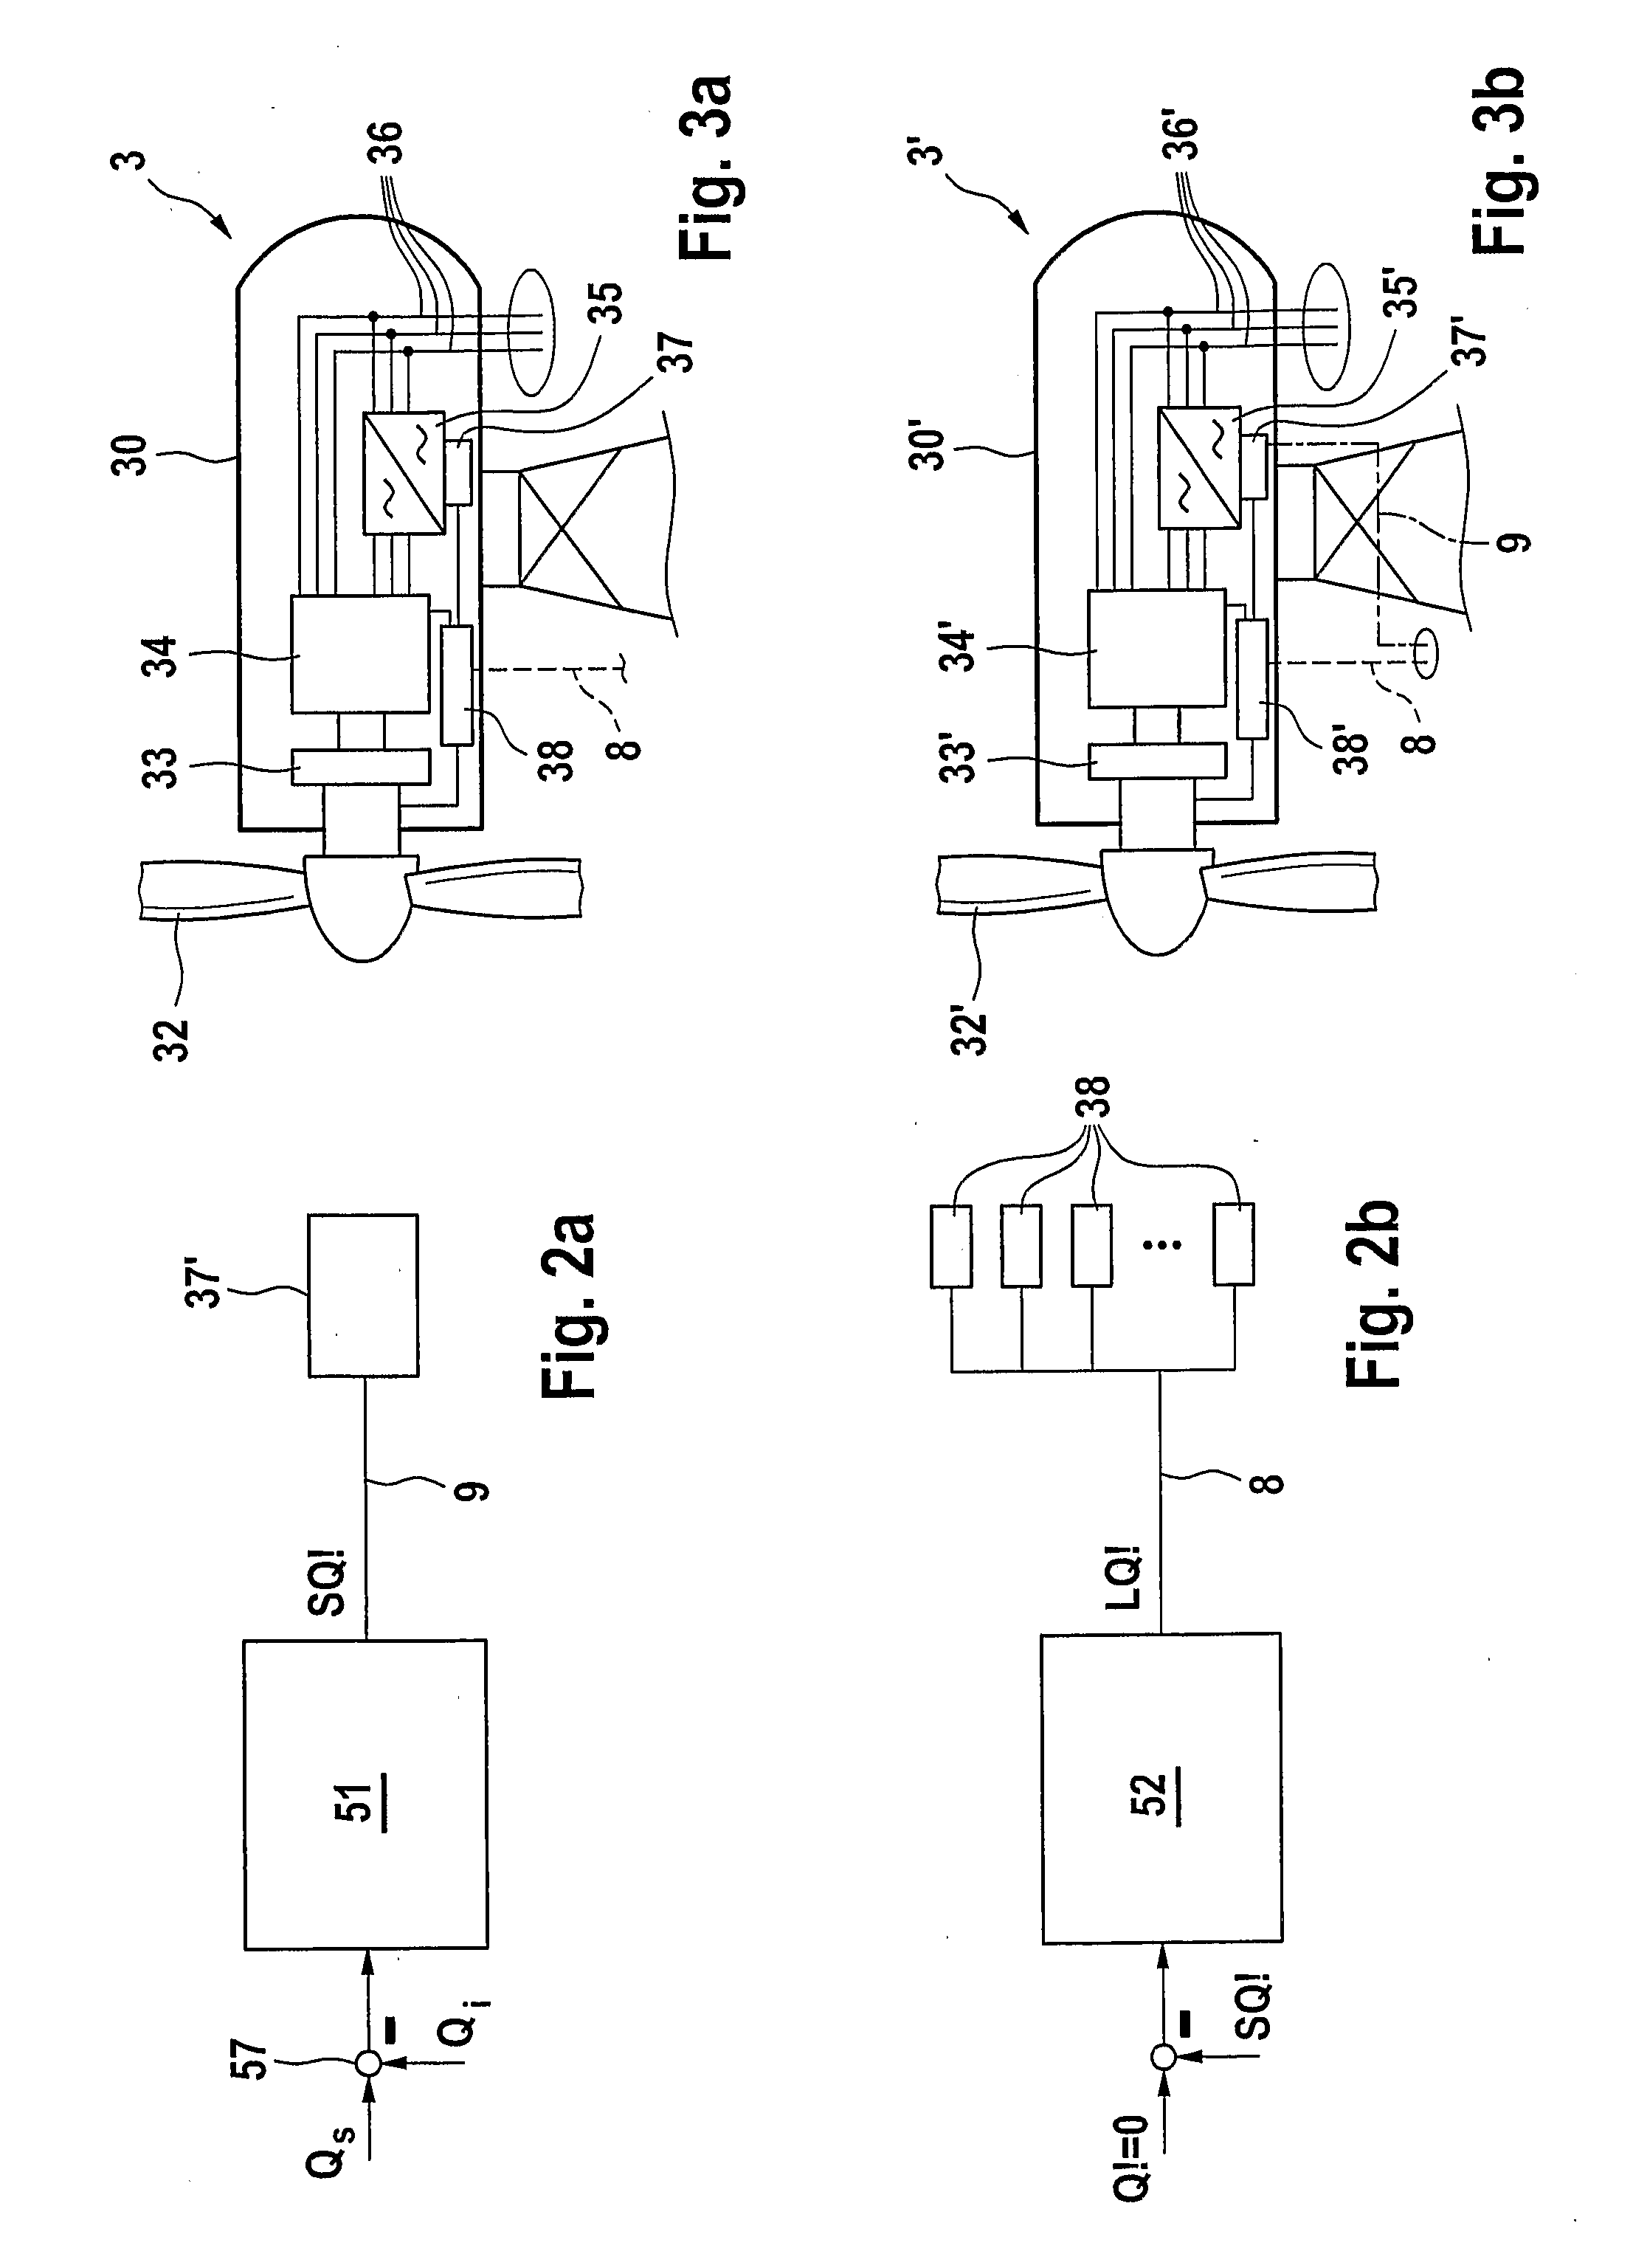 Power Control of a Wind Farm and Method Thereof